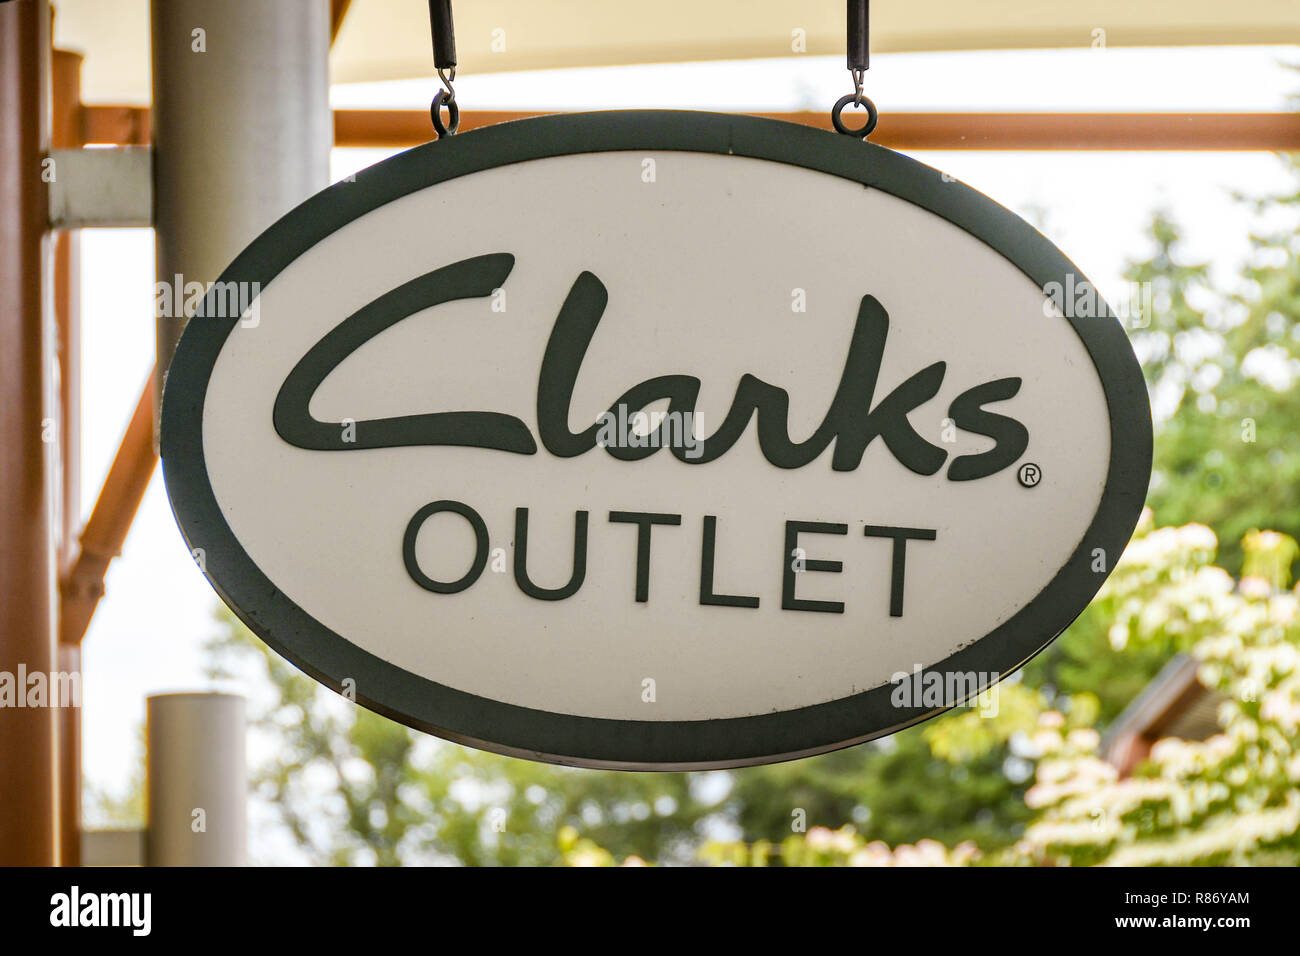 clarks bostonian outlet somerville ma